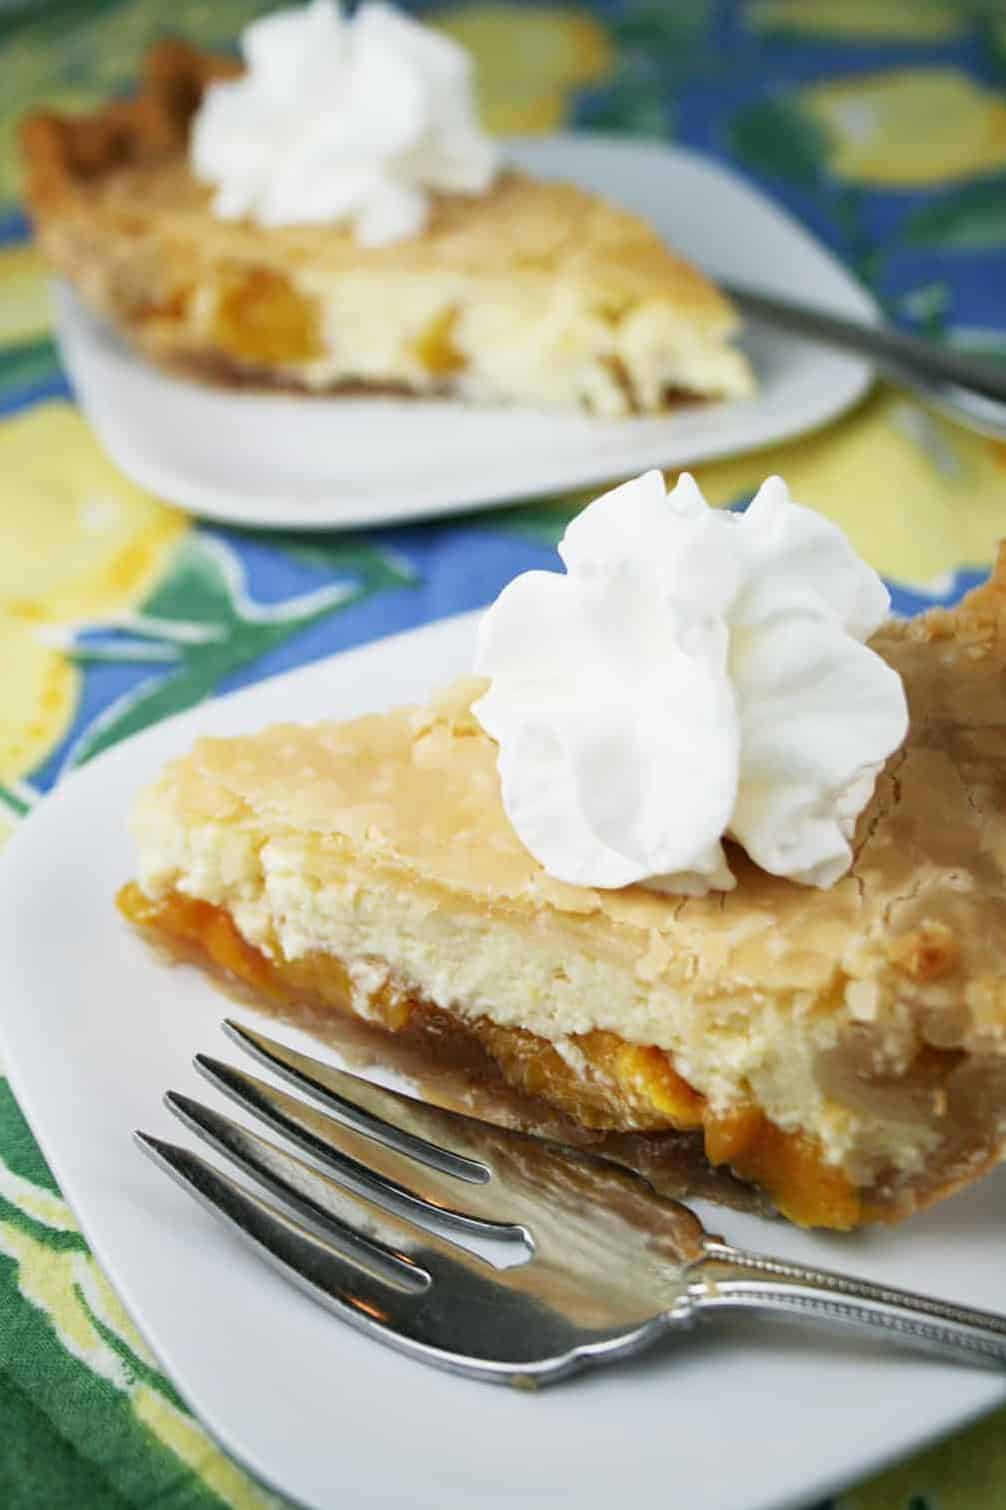  Juicy, sweet peaches meet cheesy goodness in this delicious Peacheesy Pie.